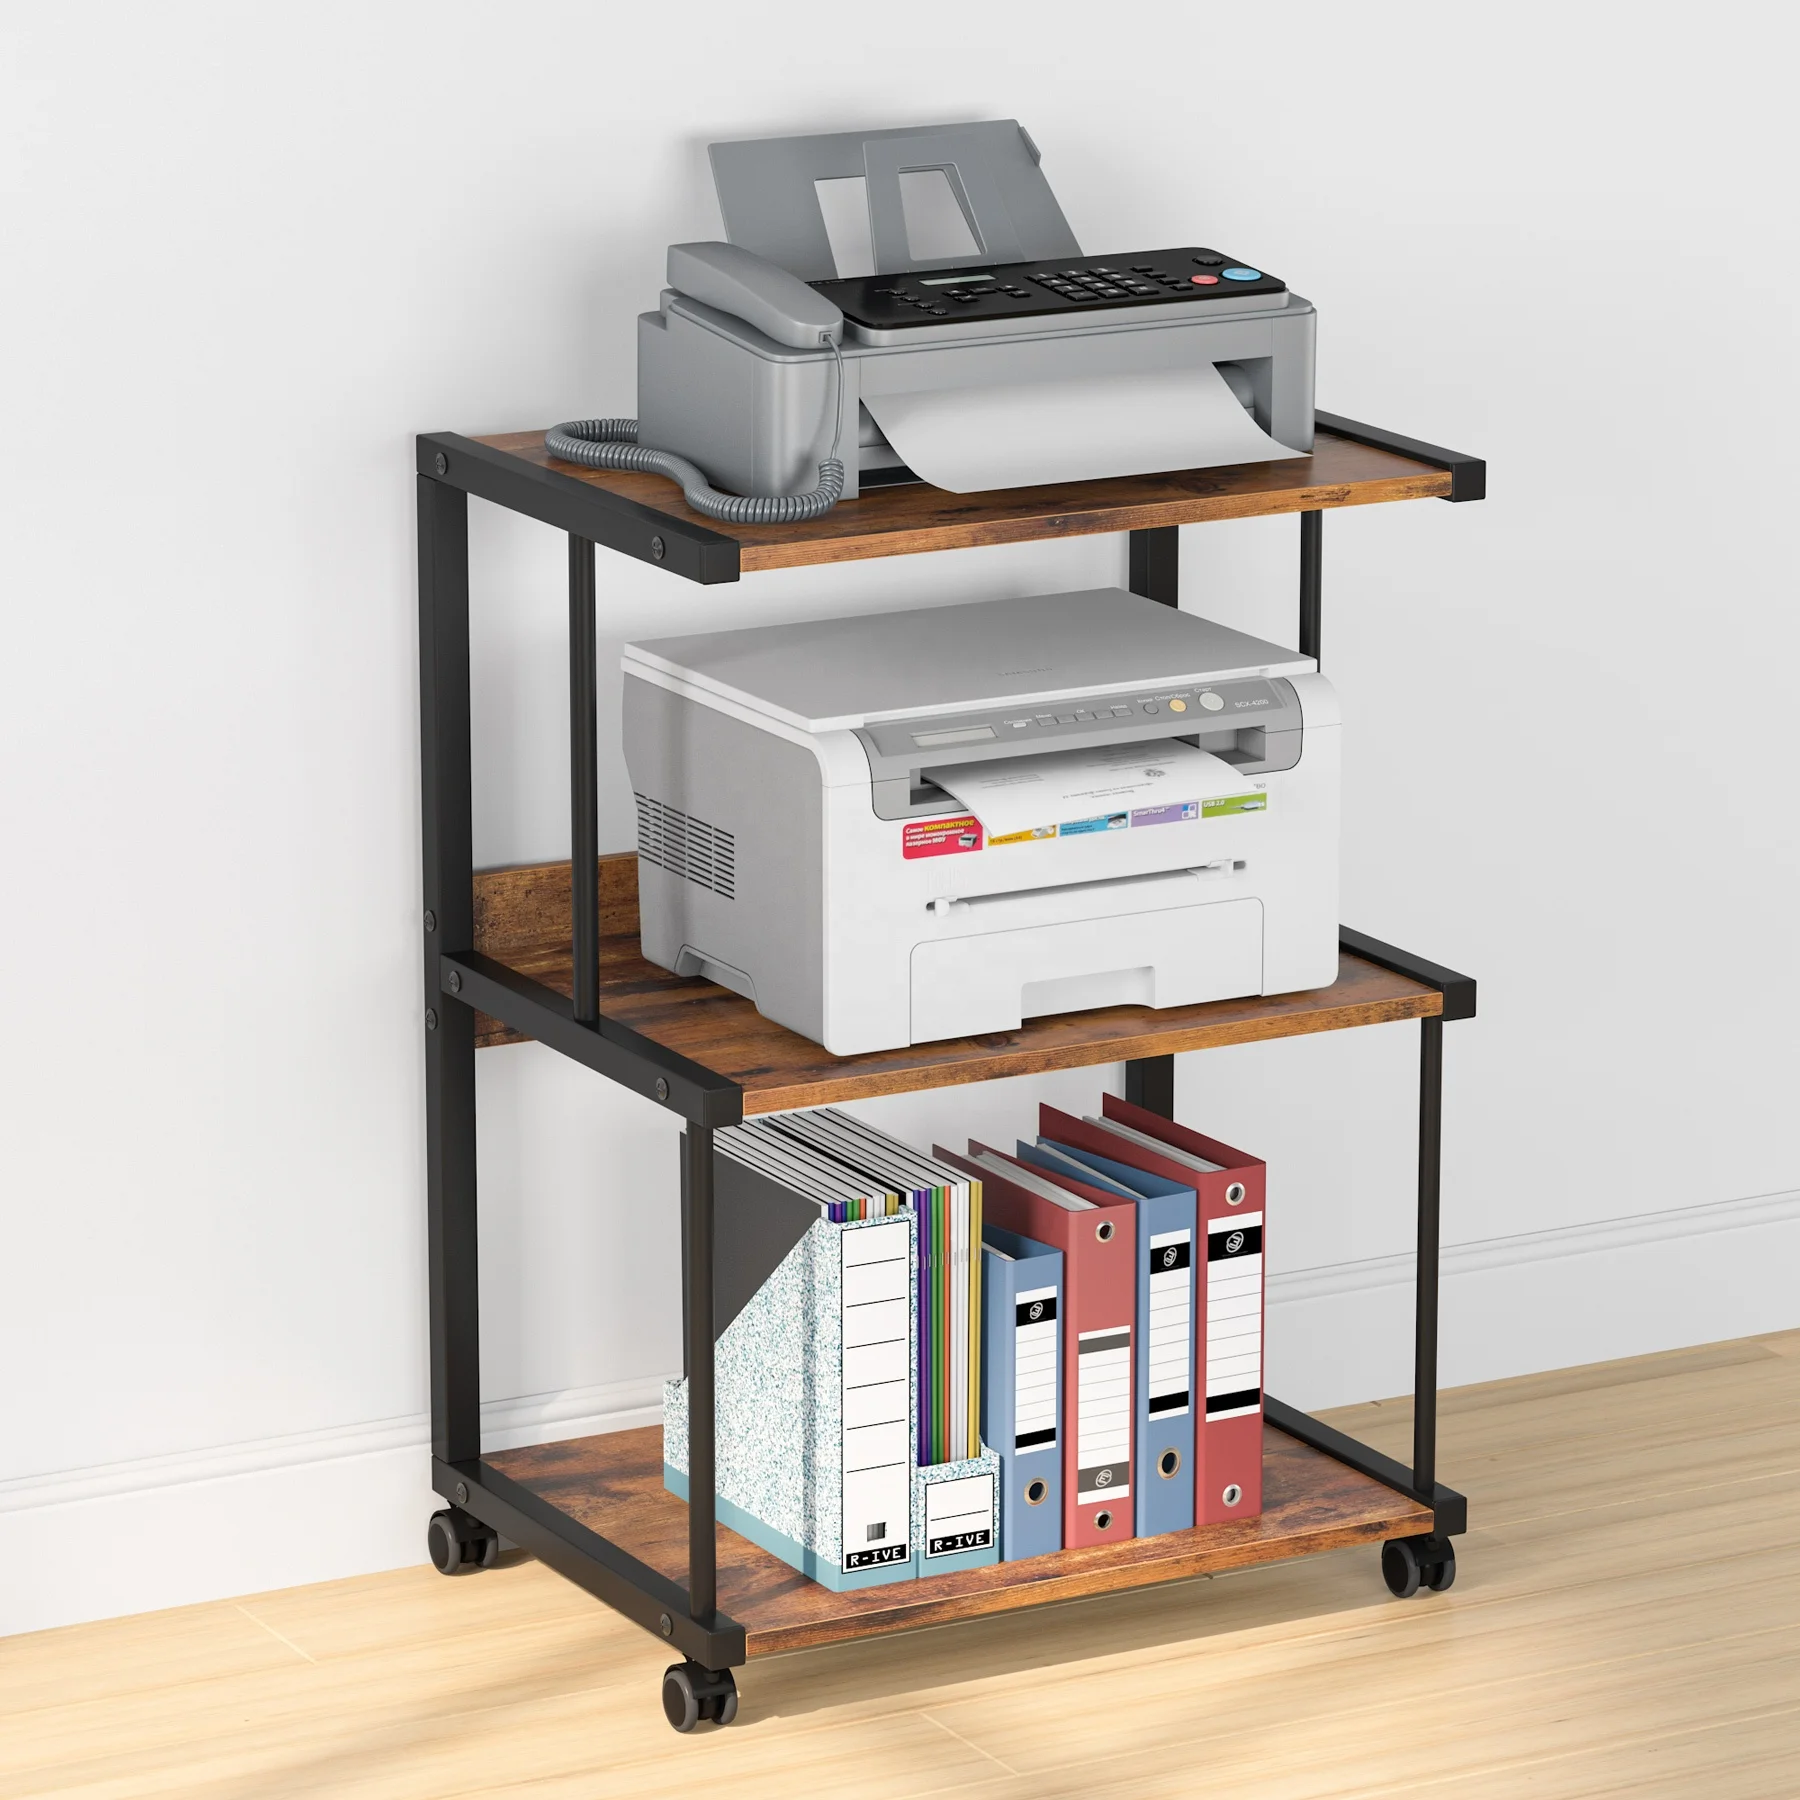 Rolling 3 tier Printer Stand Table Machine Cart with Storage Mobile Desk Organizer Shelves for Office Home Brown